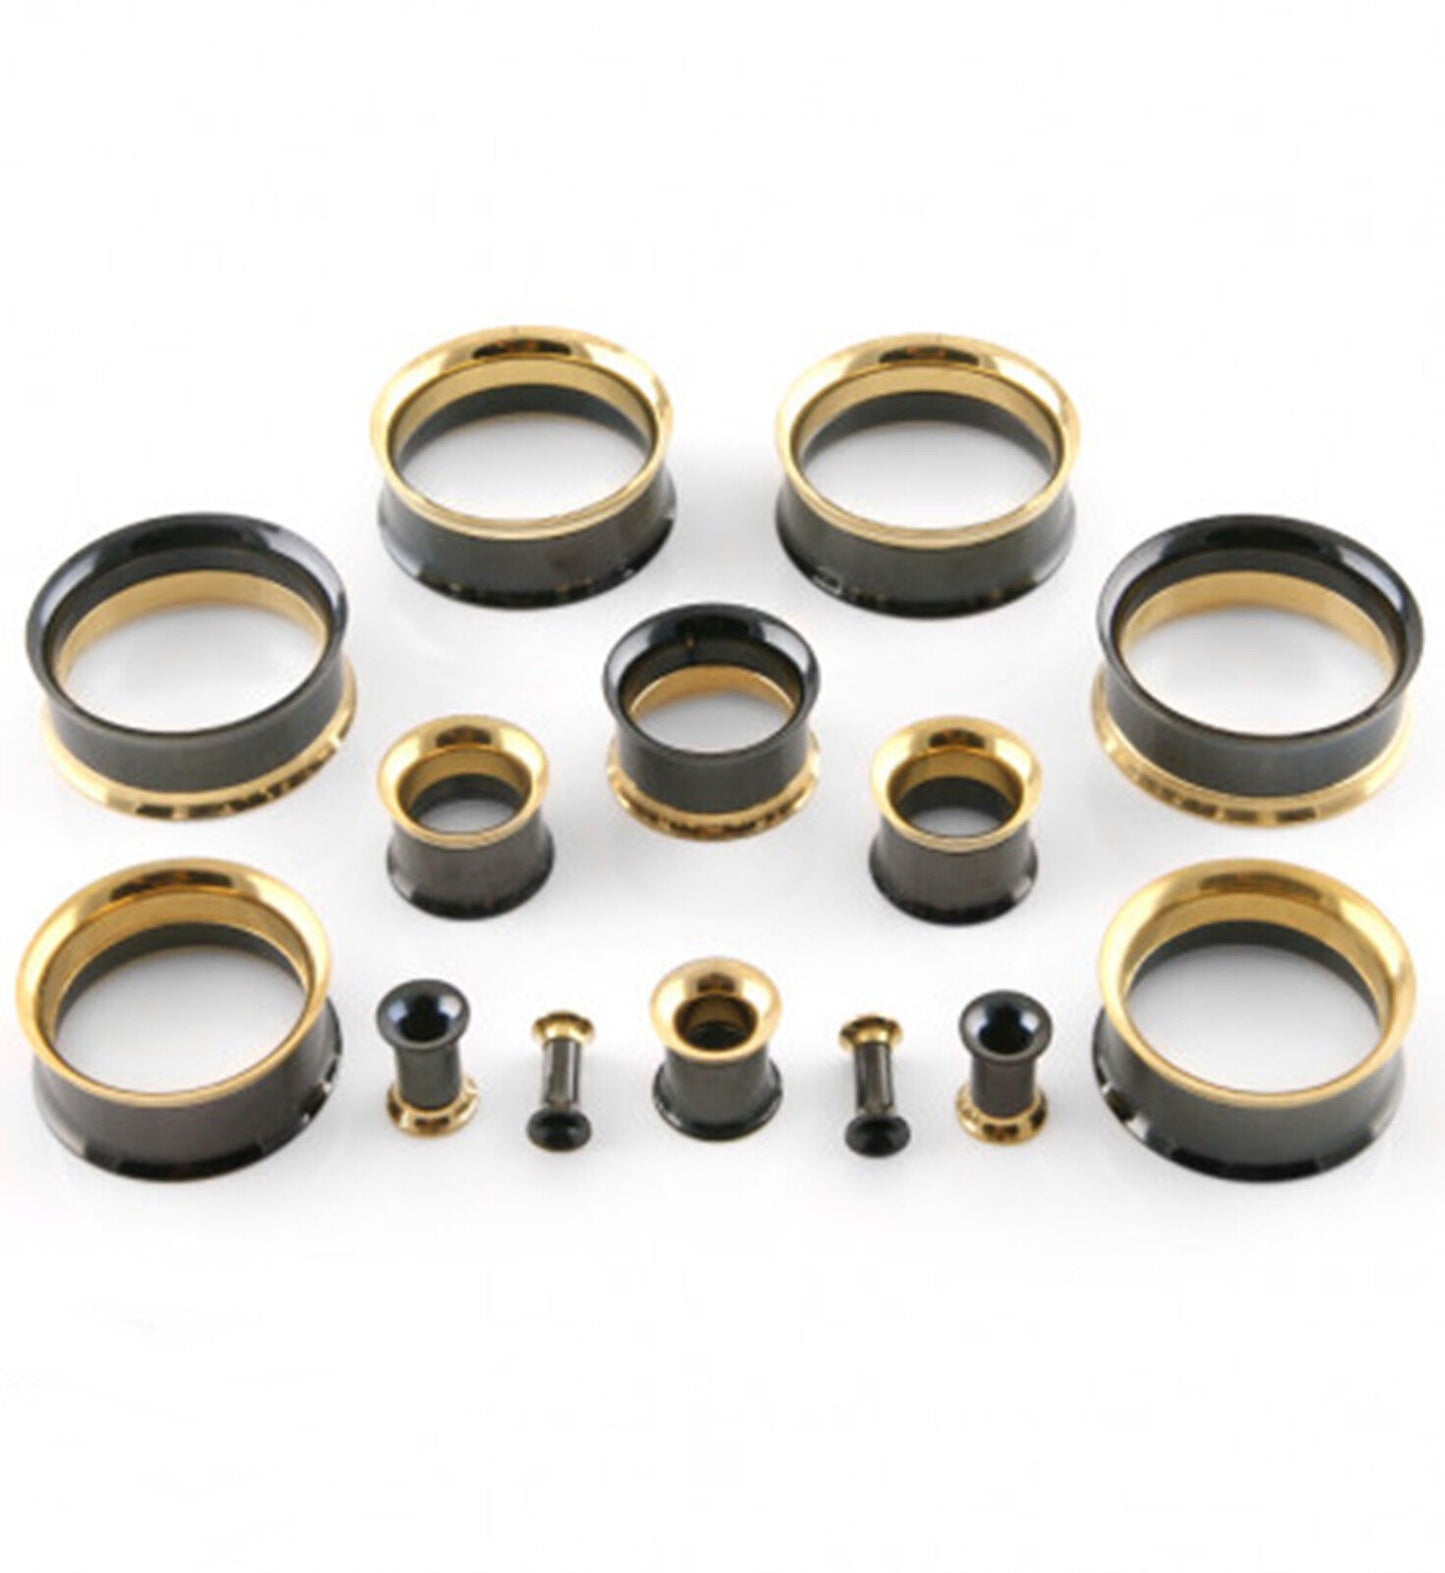 Double Flared Black Gold Screw Fit Plug Ear Tunnel 8 to 1" Gauge - Set